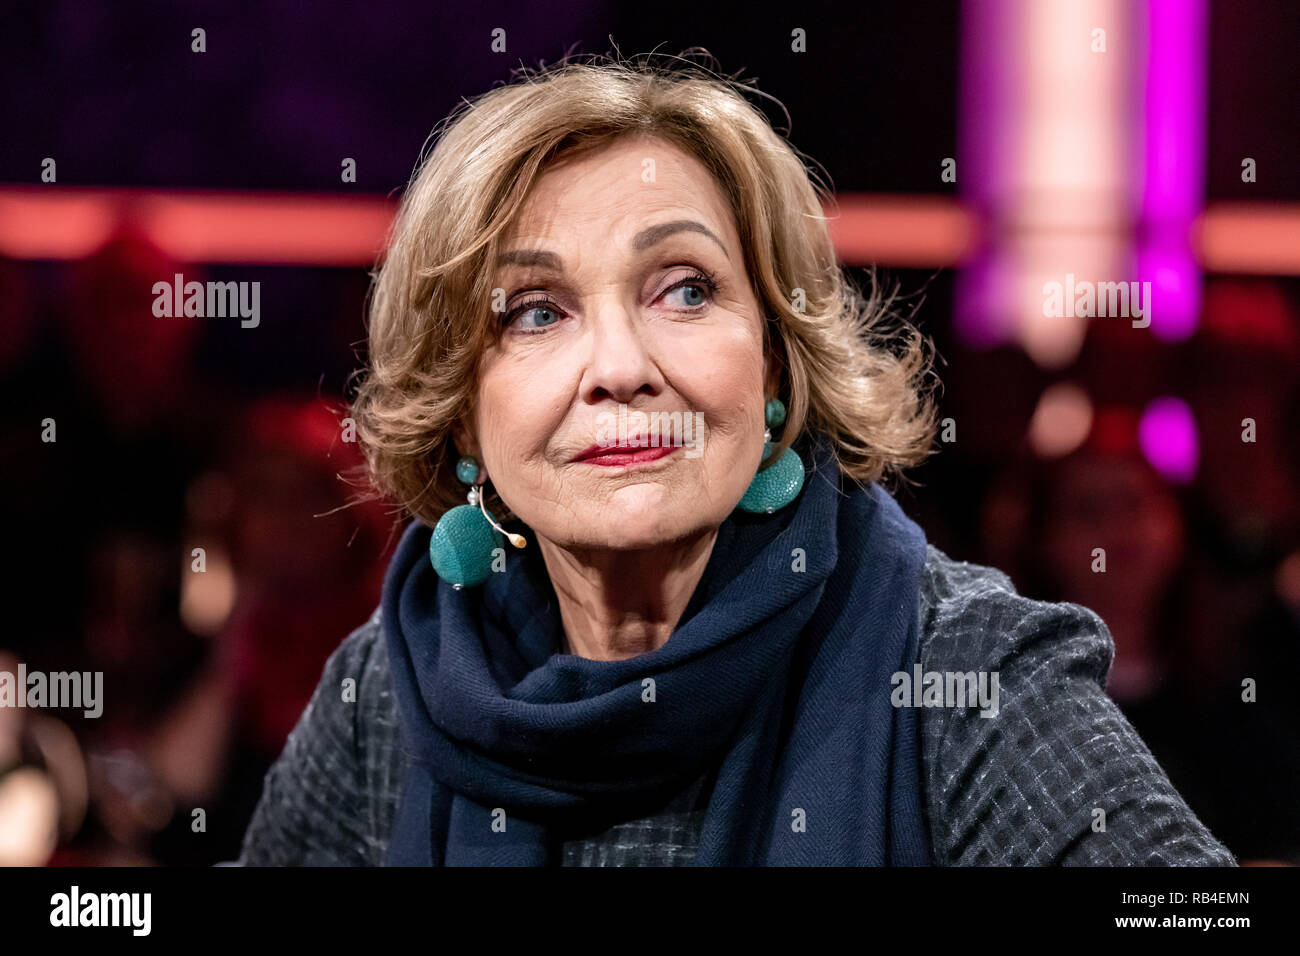 14 December 2018, Saxony, Leipzig: The actress Gila von Weitershausen, recorded during the MDR talk show 'Riverboat' on 14.12.2018 in Leipzig. Photo: Thomas Schulze/dpa-Zentralbild/ZB Stock Photo